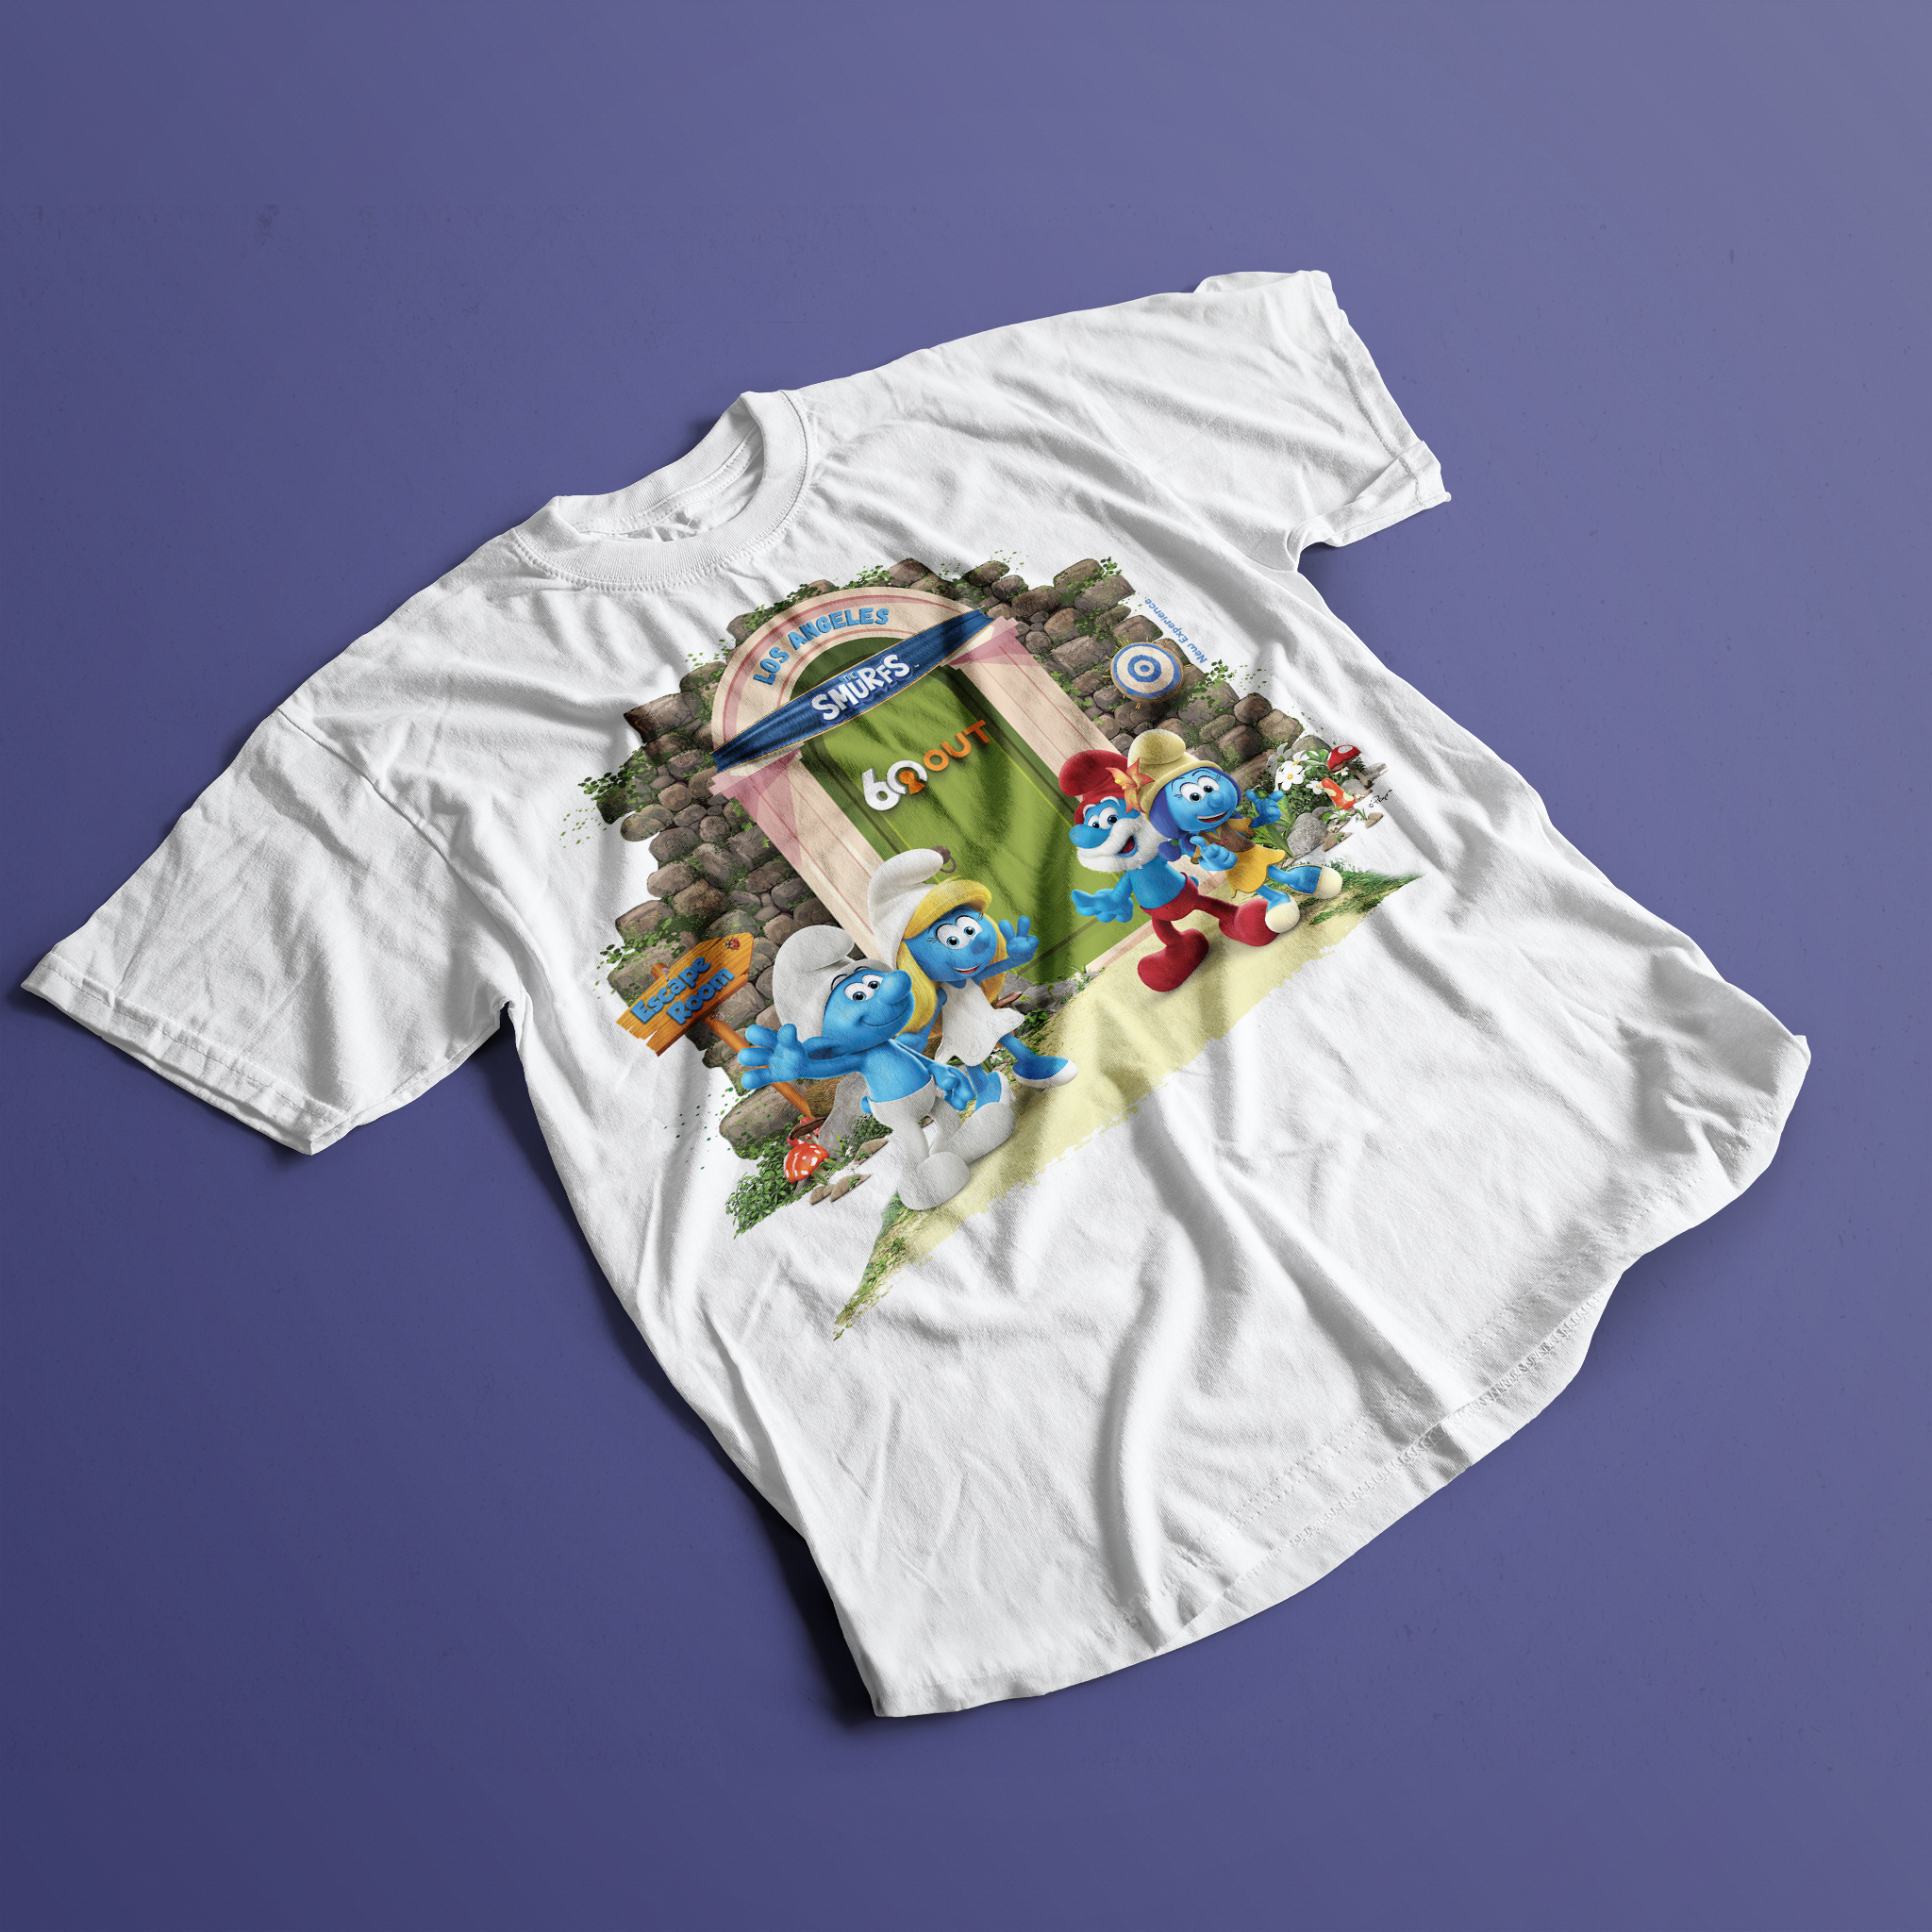 "The Smurfs" / 60out T-shirt